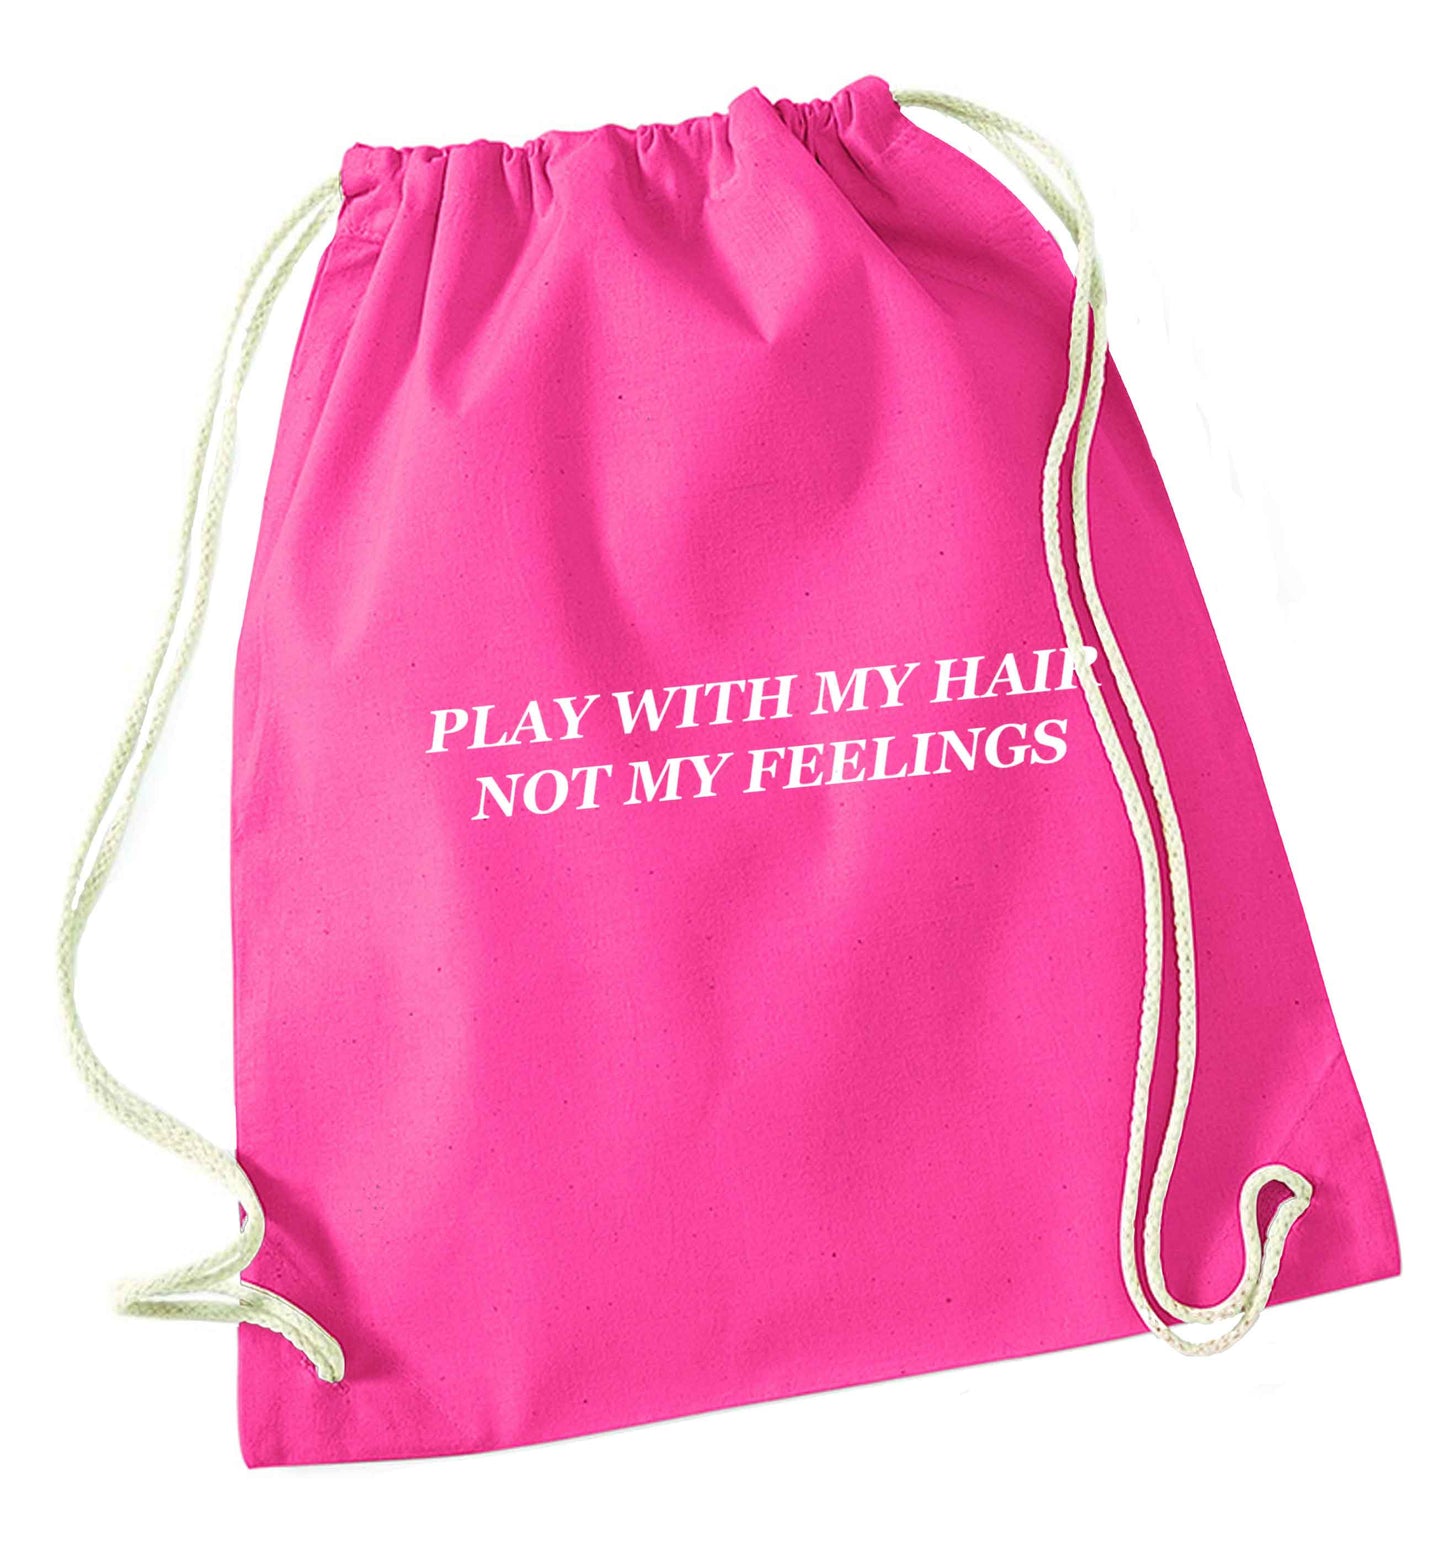 Play with my hair not my feelings pink drawstring bag